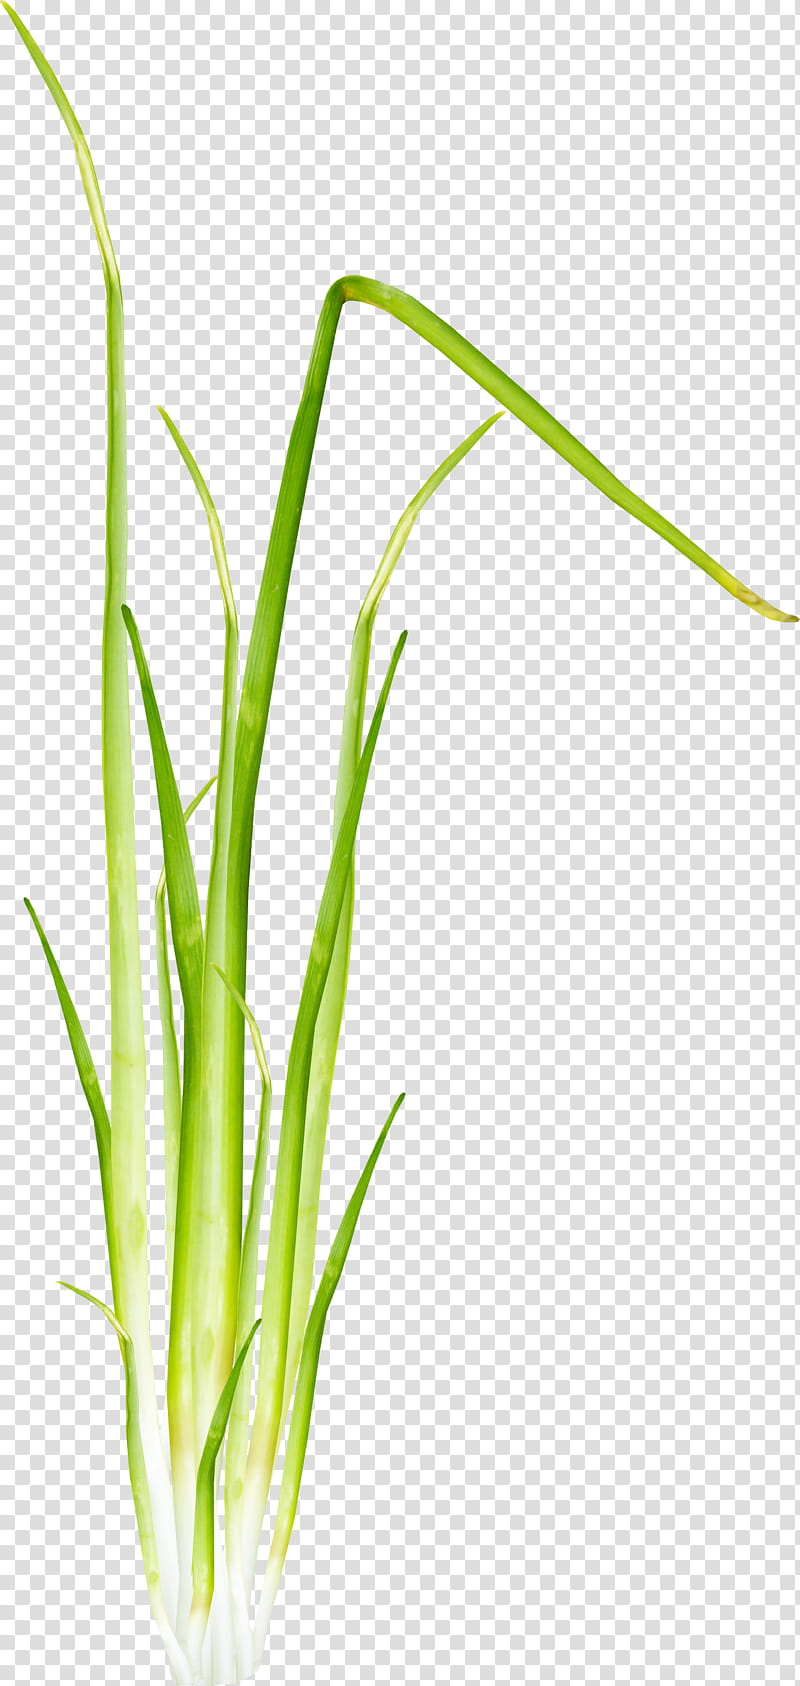 Grass Flower, Welsh Onion, Grasses, Barley, Onions, Plant, Chives, Vegetable transparent background PNG clipart